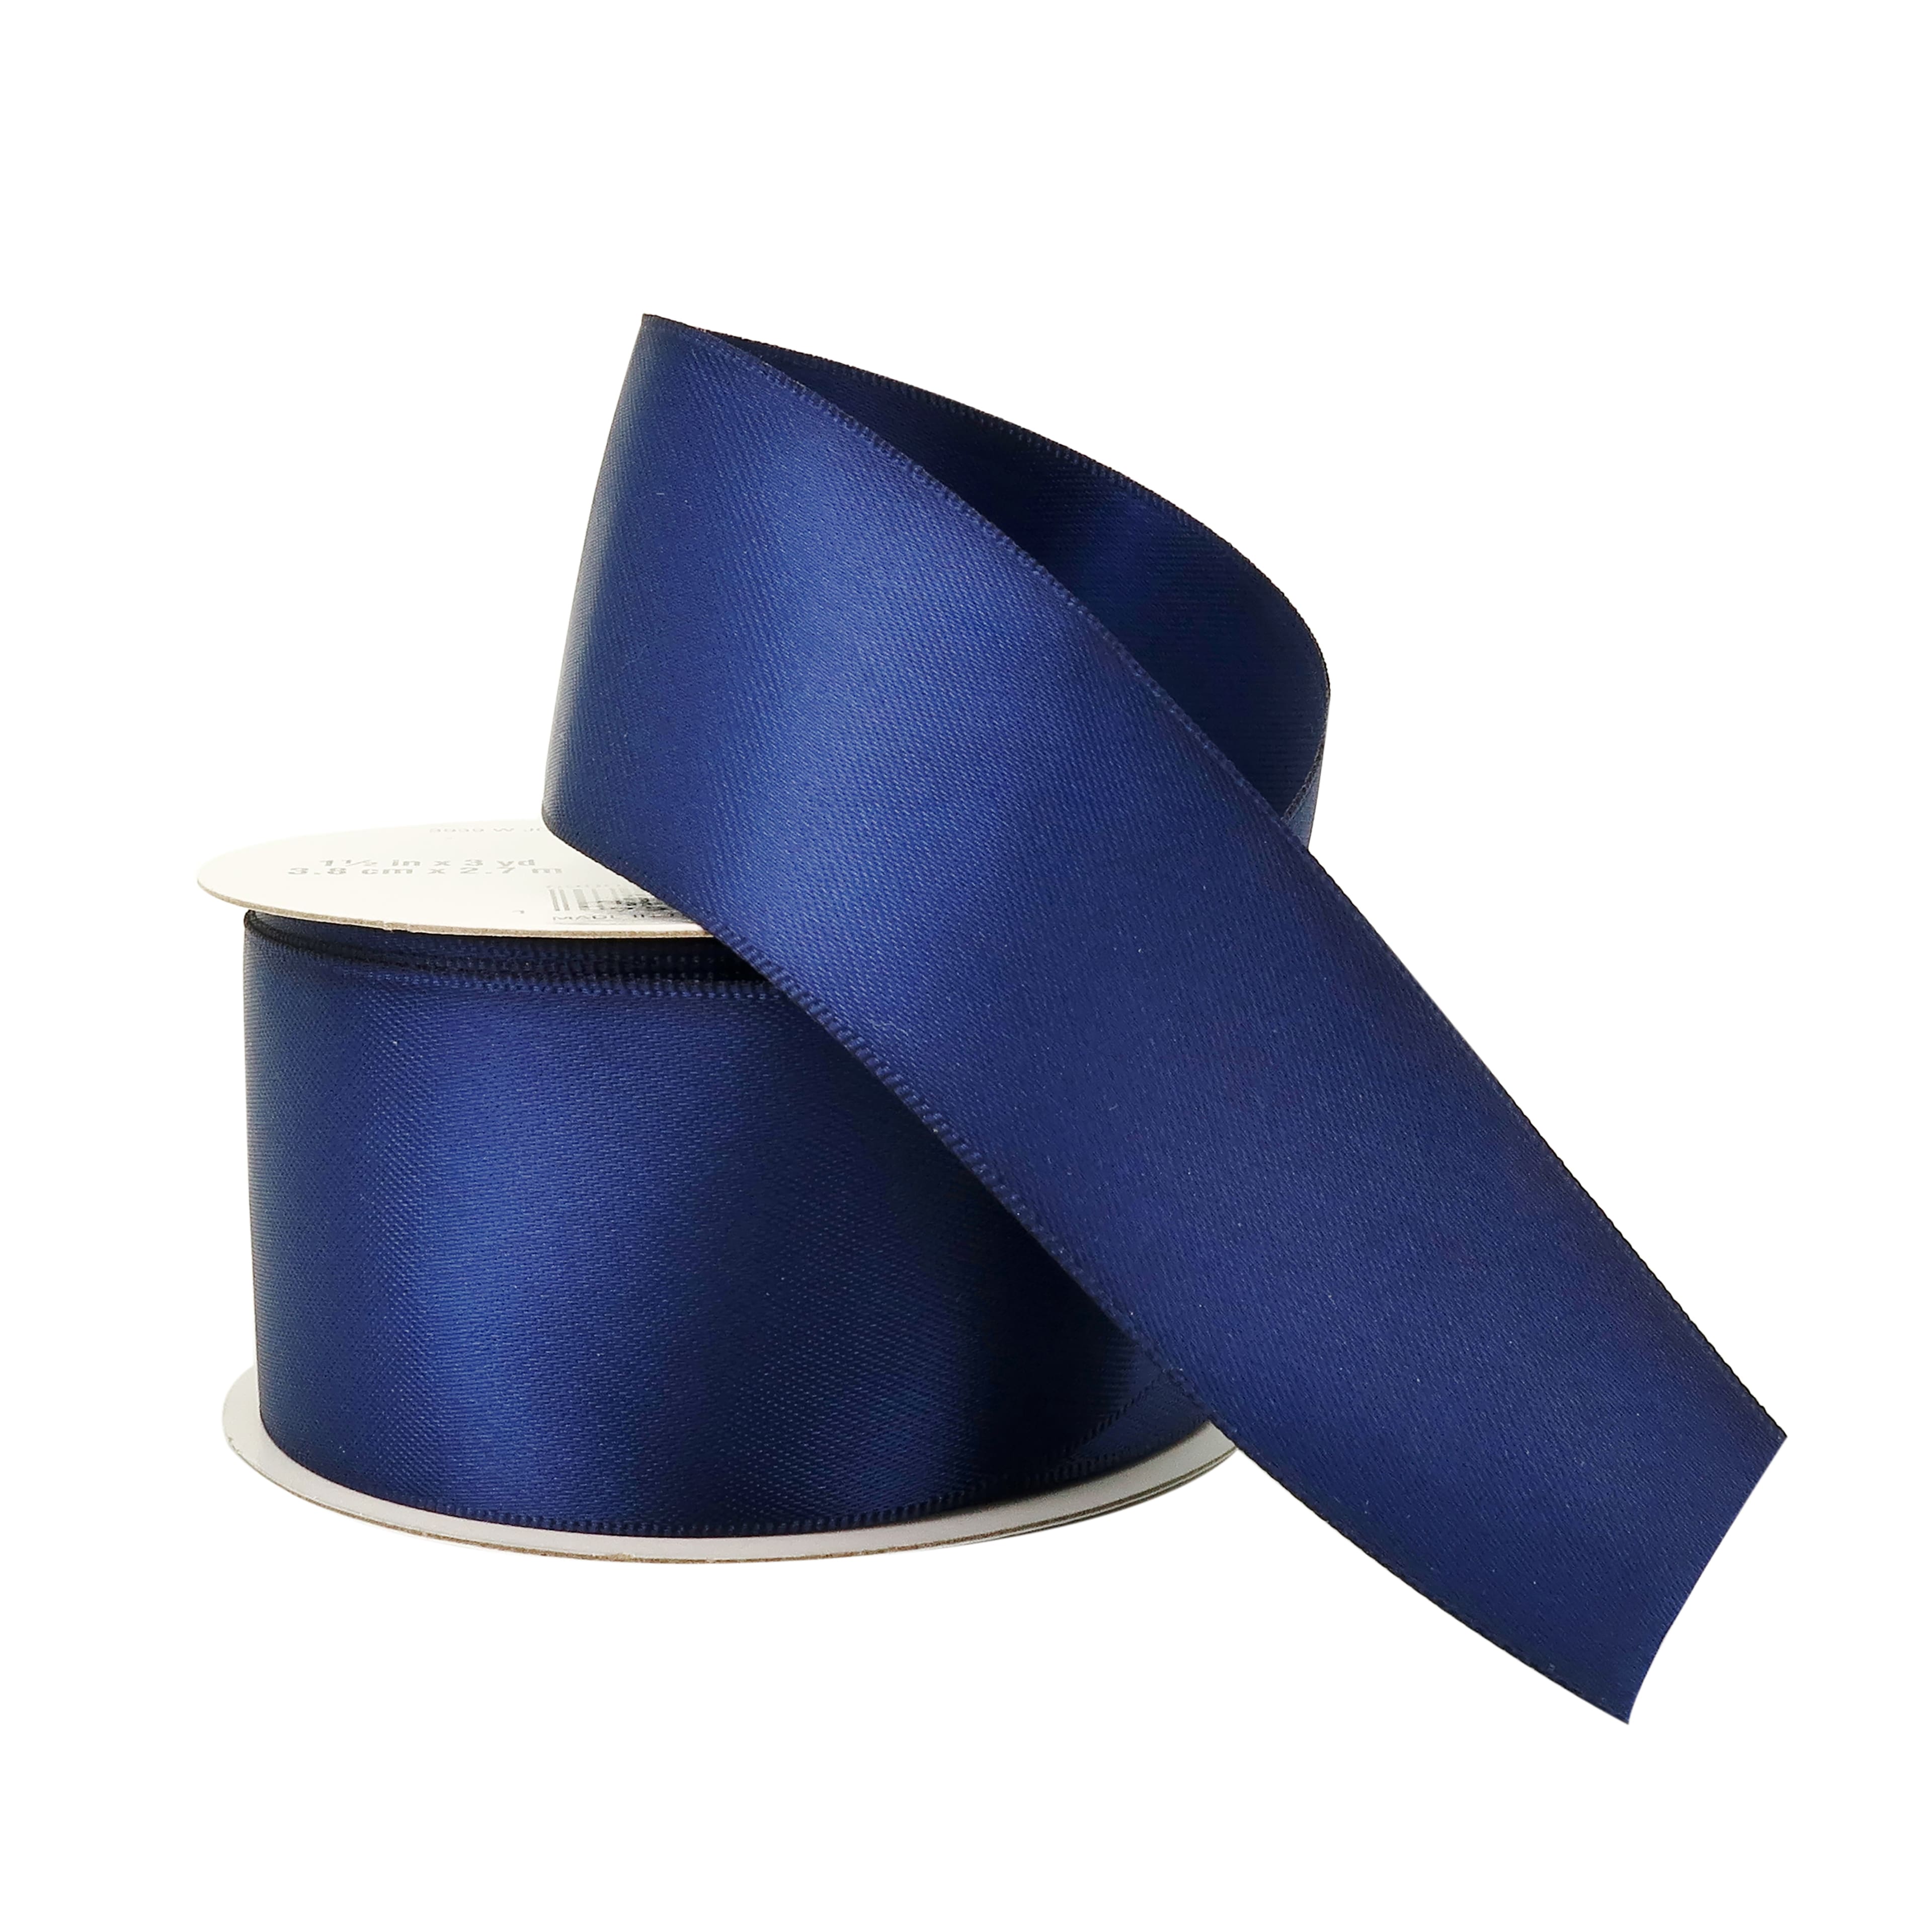 Pre-Cut Satin Ribbon, 1-3/4 x 1-1/2 Inches, Blue, Pack of 25